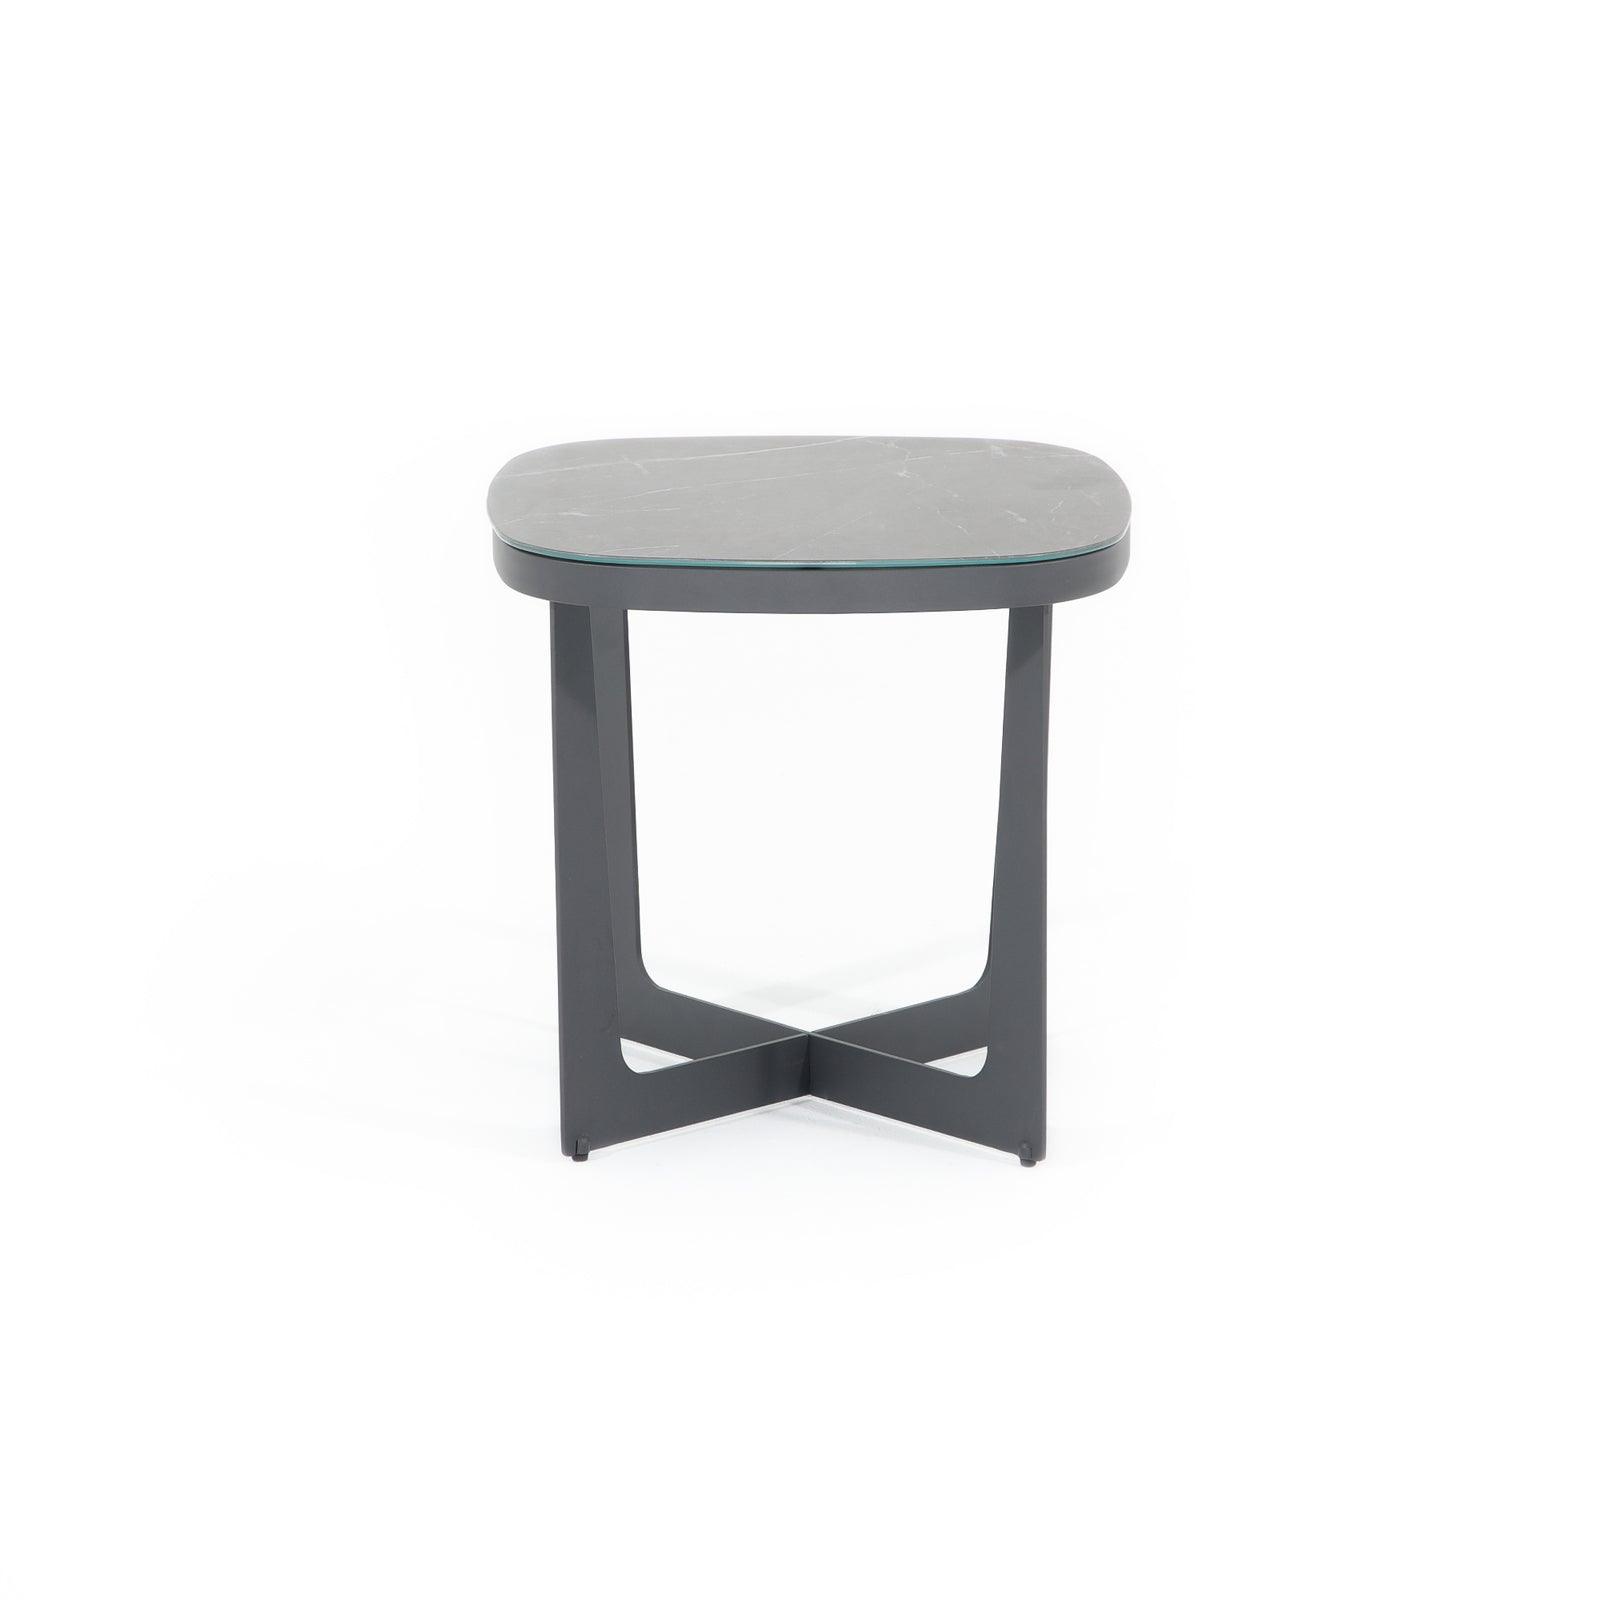 Burano Grey outdoor small side table with aluminum frame, glass top, front view- Jardina Furniture